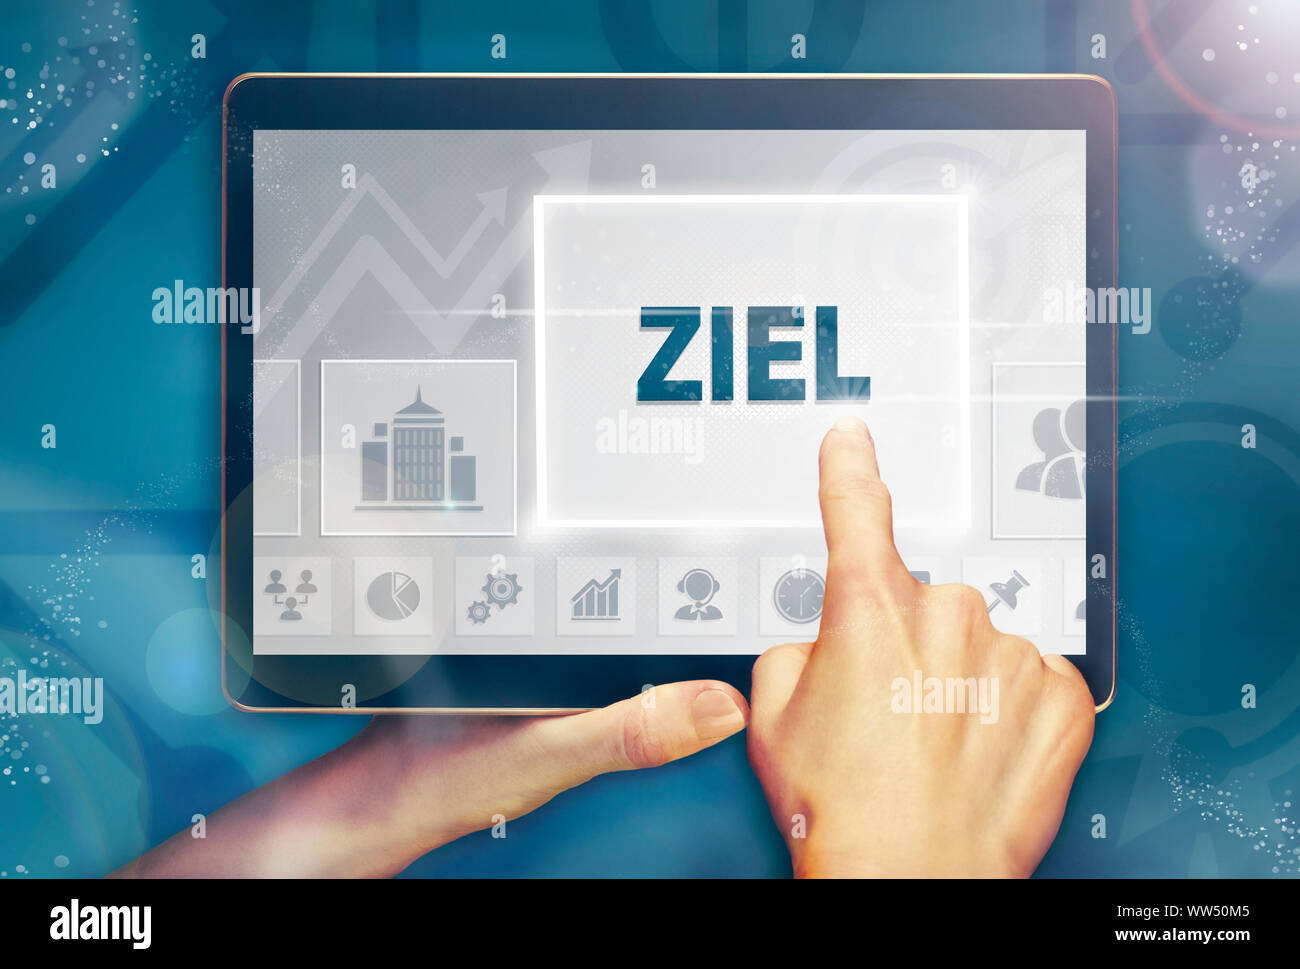 A hand holiding a computer tablet and pressing a Aim "Ziel" business concept. Stock Photo